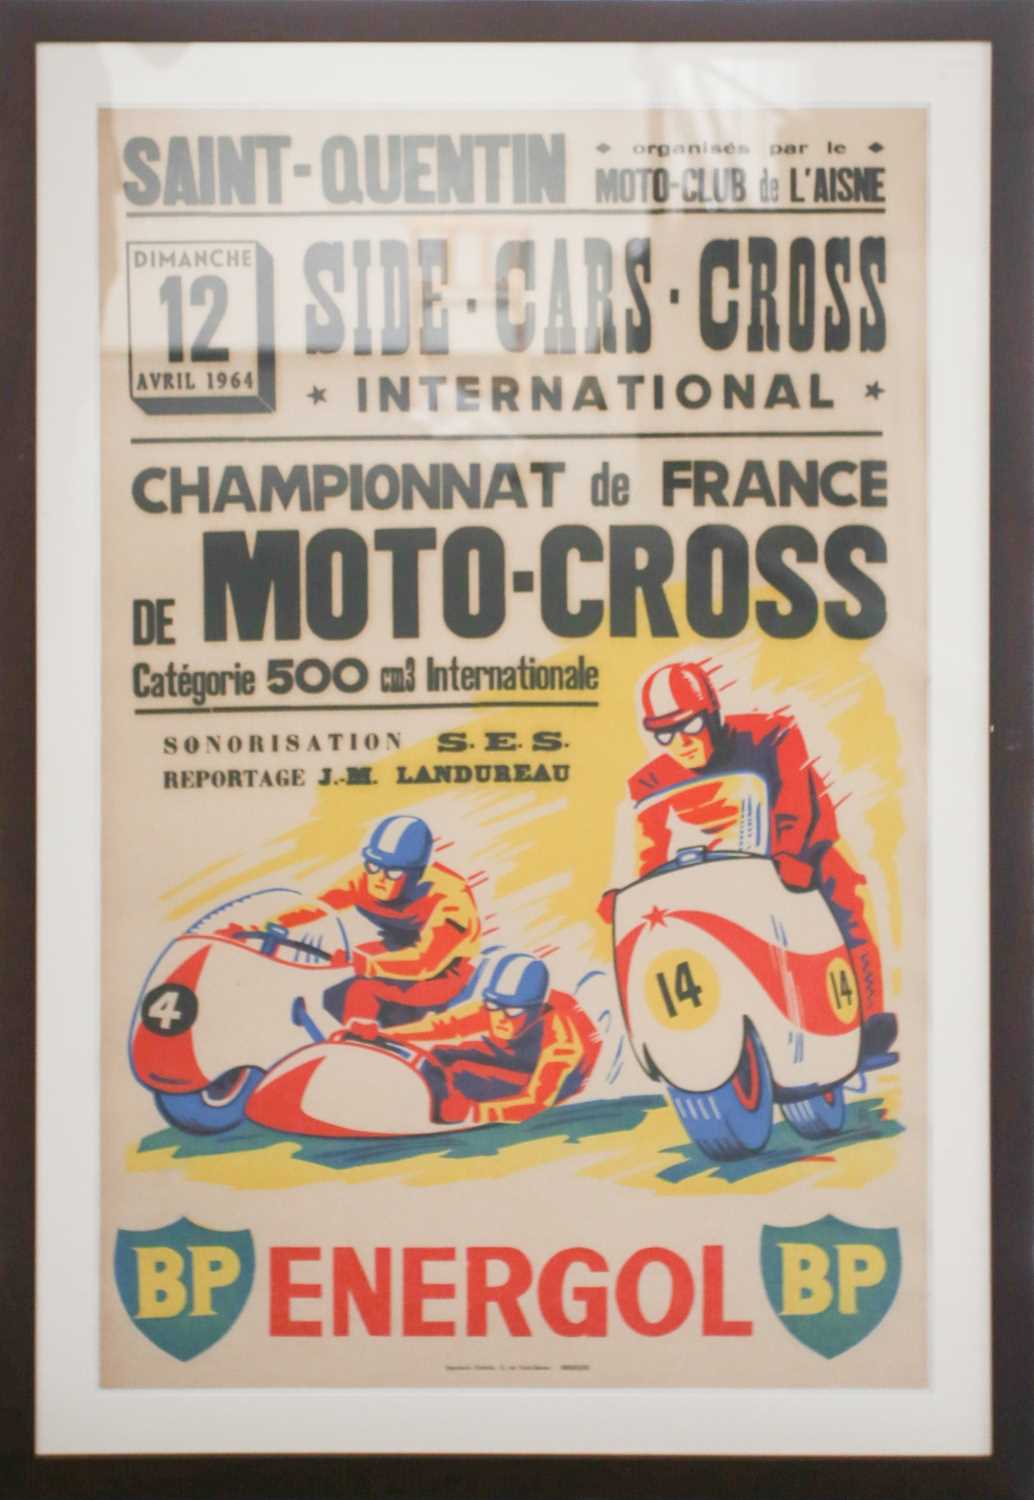 An original mid-20th century French advertising poster of Motorsport interest for the 'Championnat